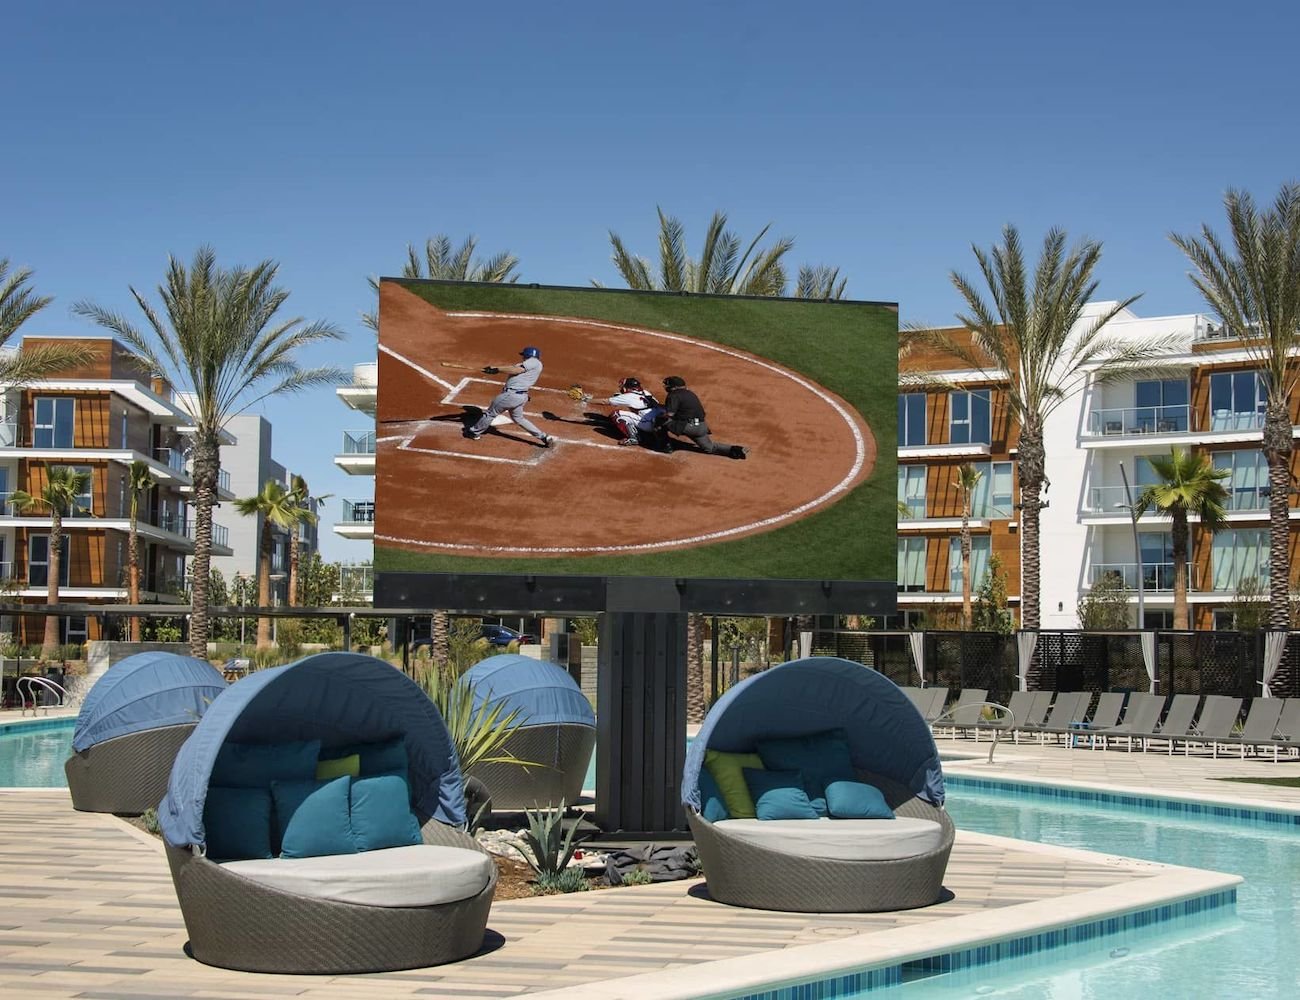 C SEED 201 Giant Outdoor LED TV hides underground until you need it